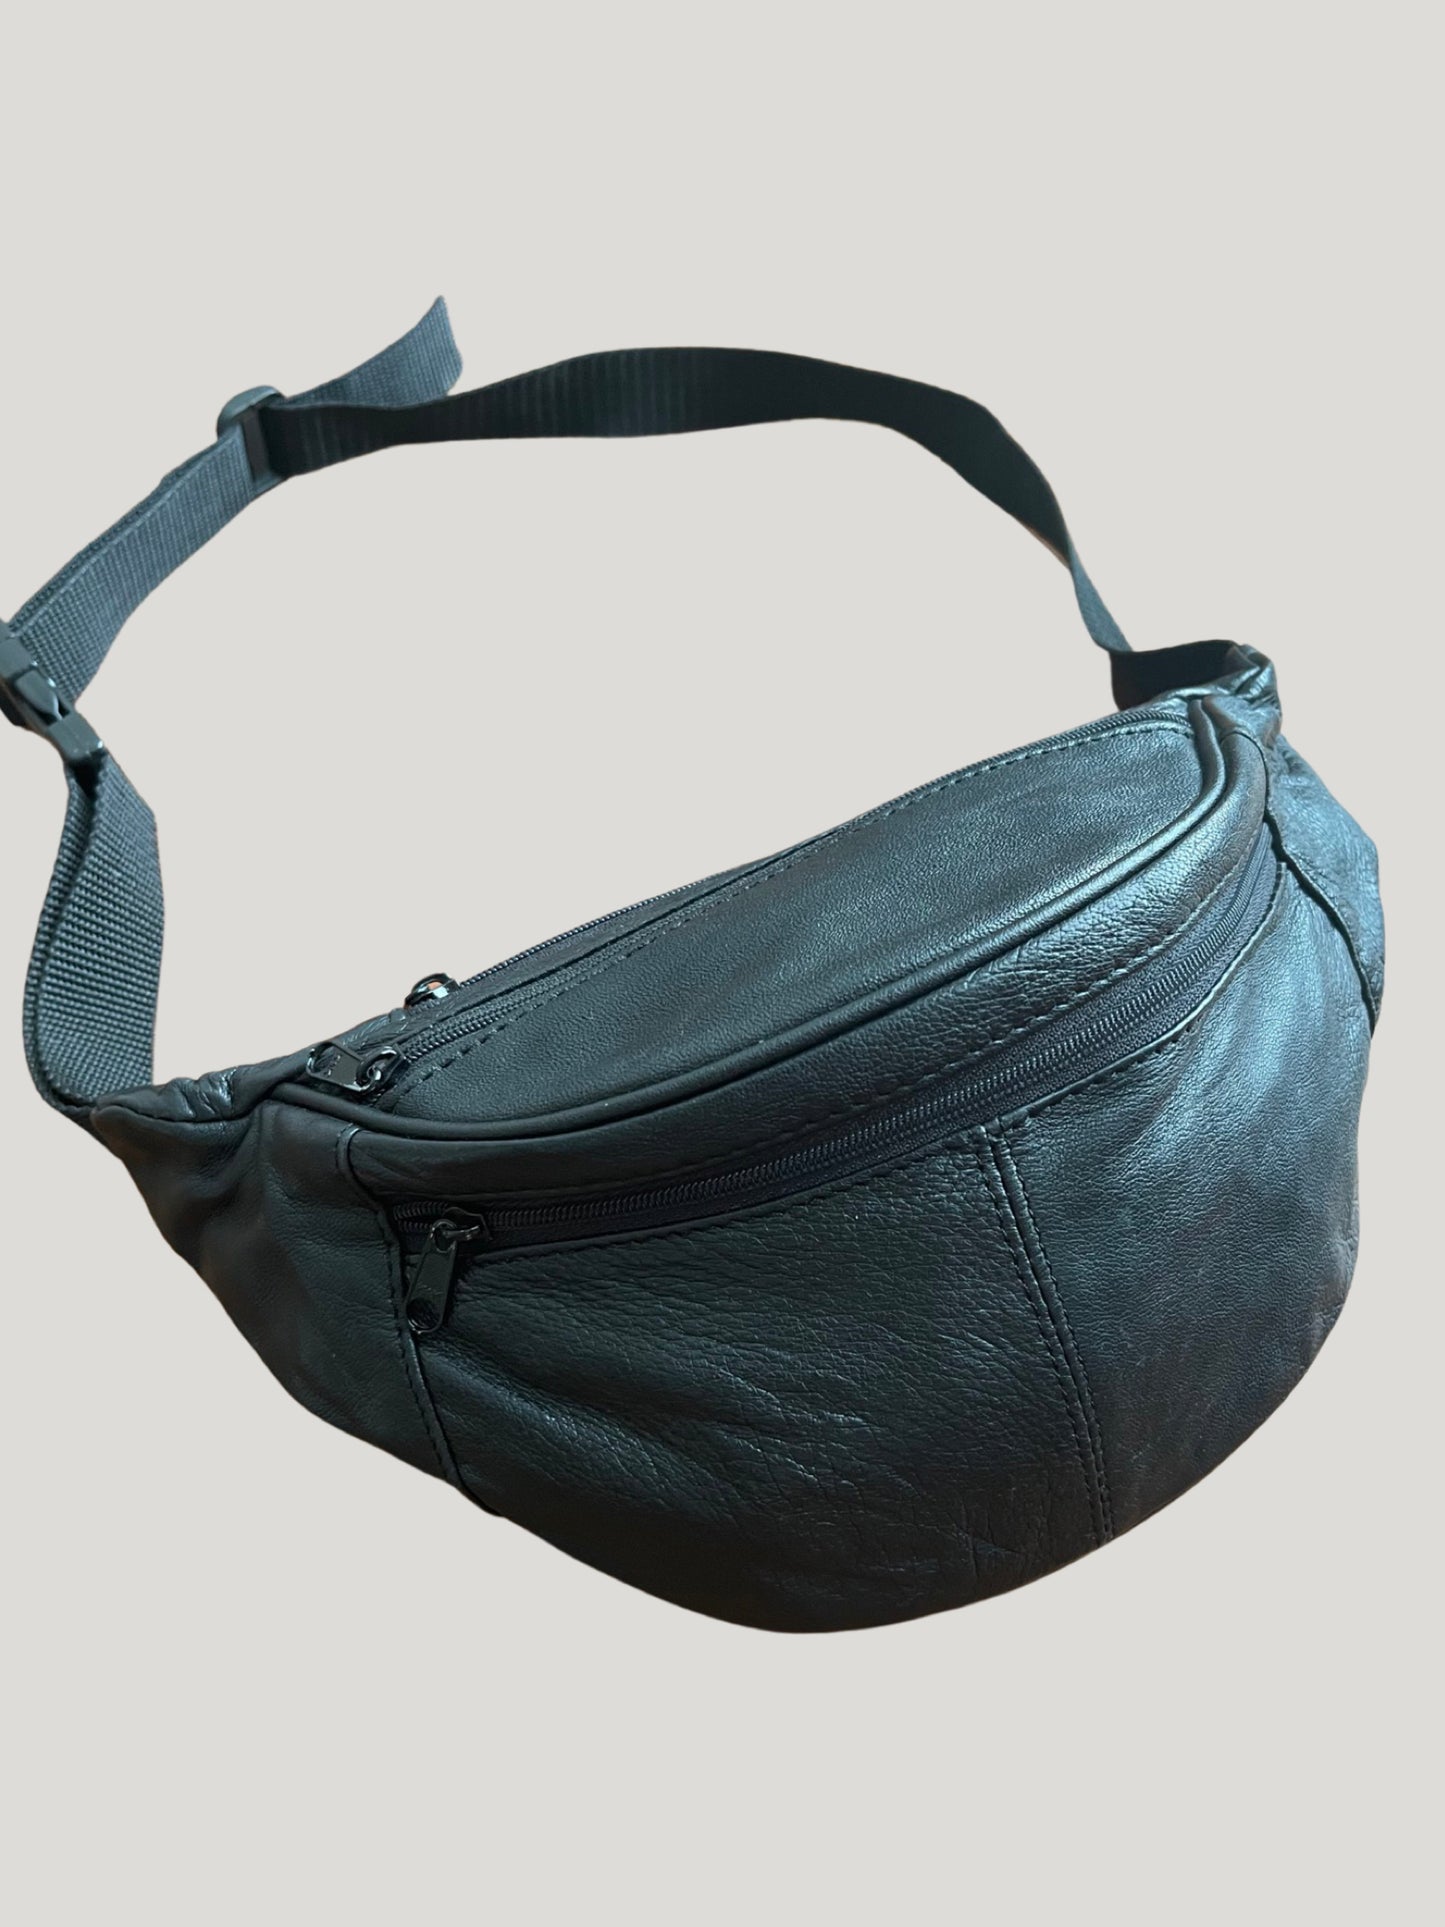 hands free leather bag